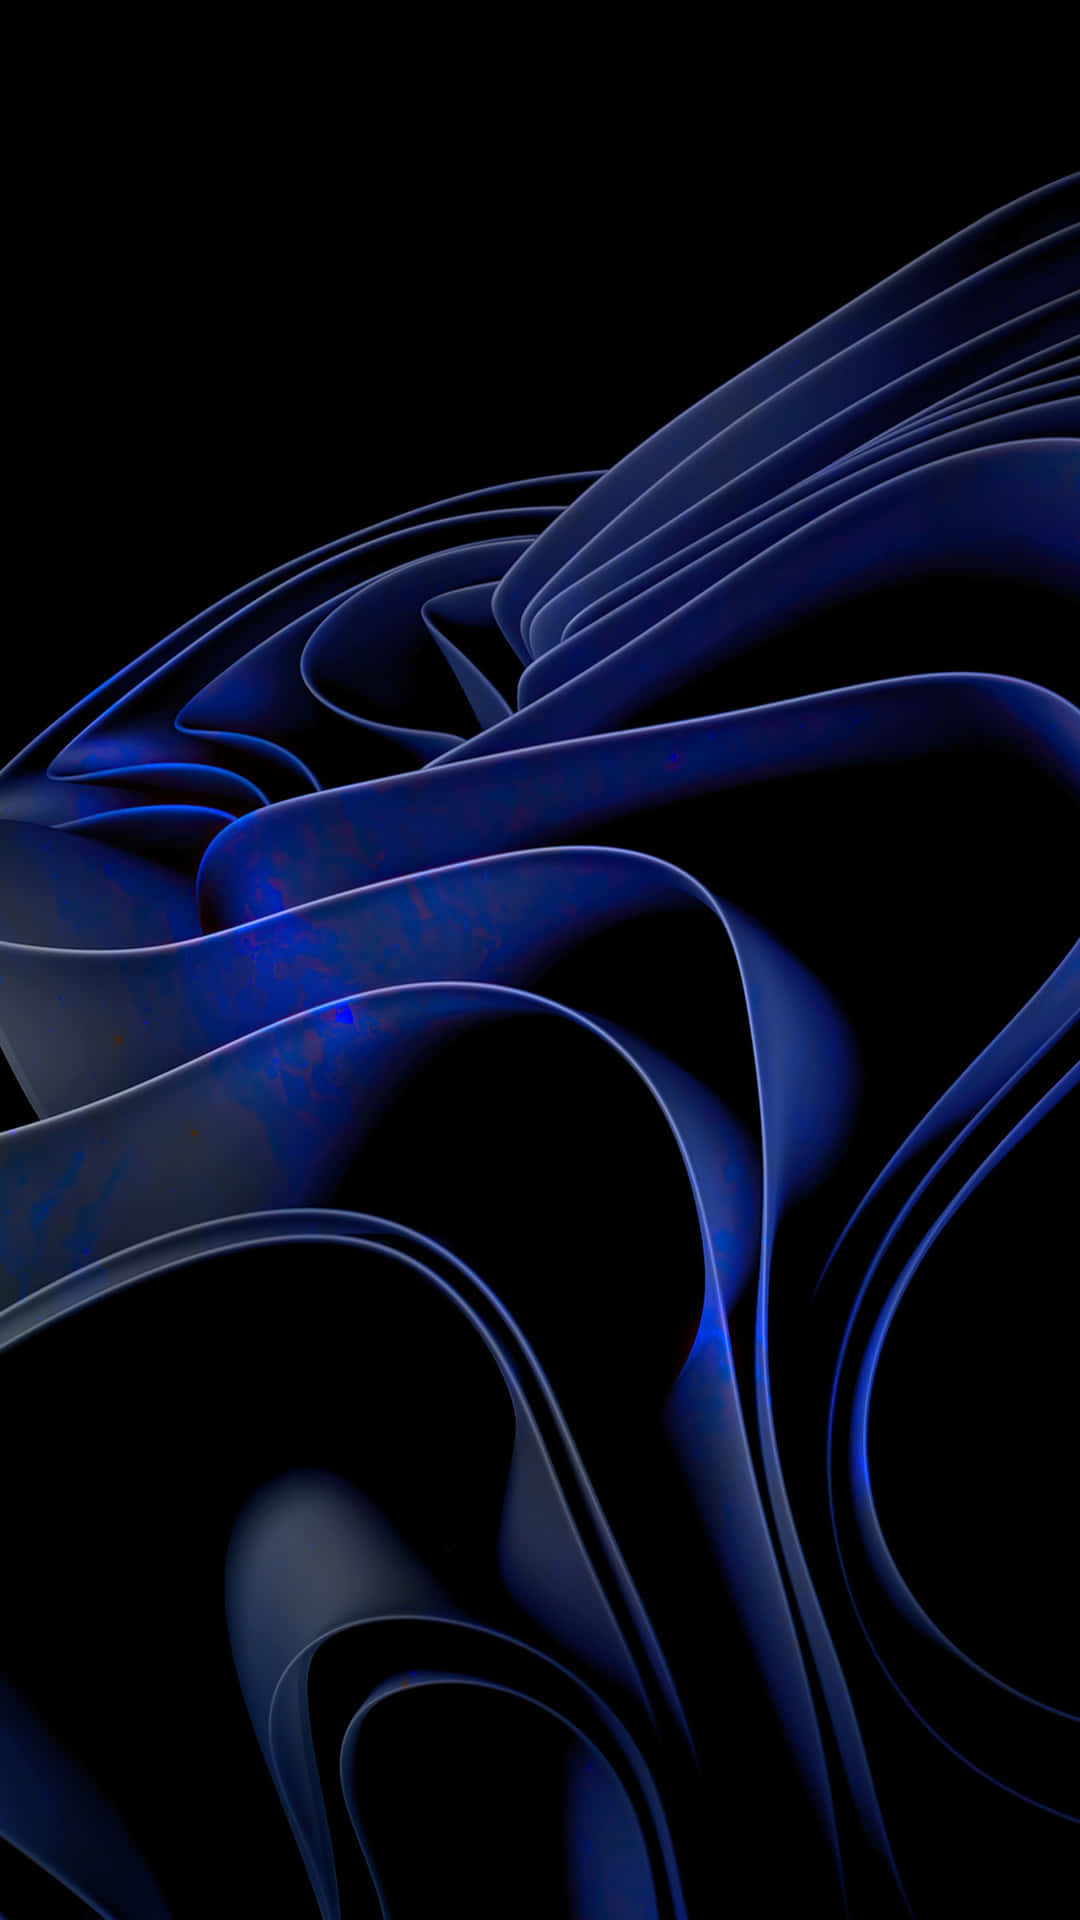 Abstract Blue Waves Background Wallpaper